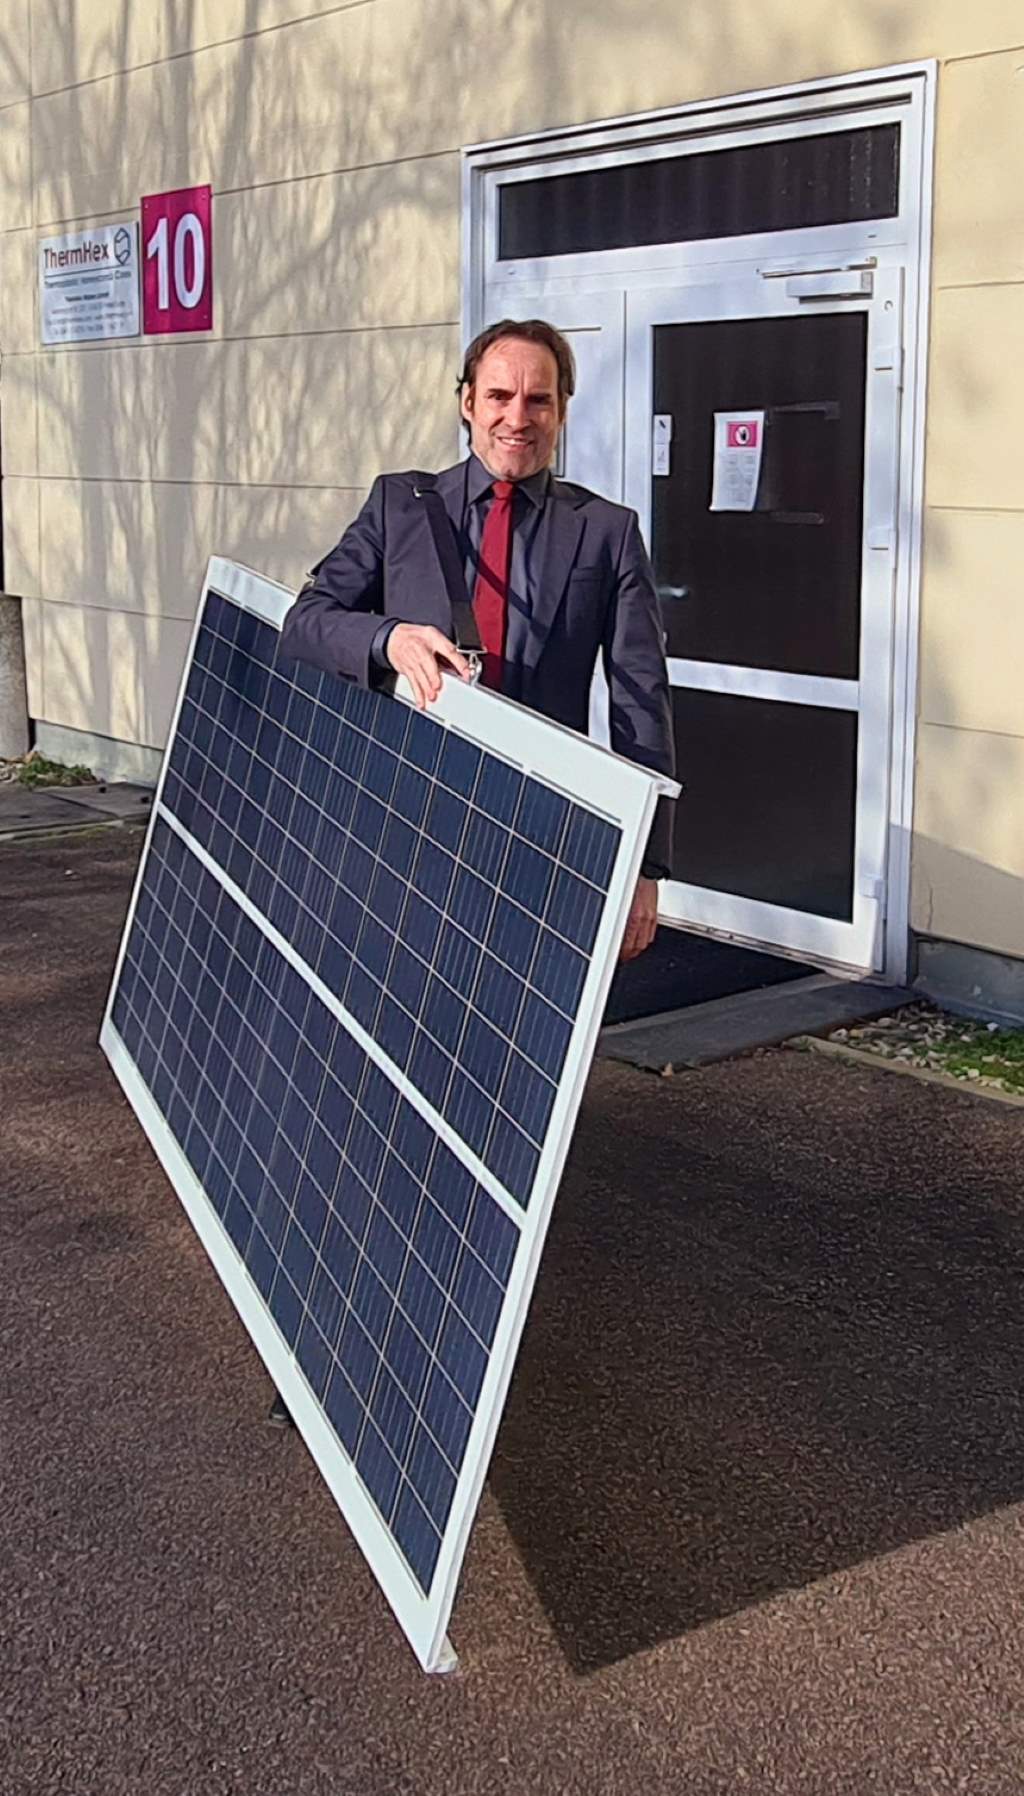 Jochen Pflug, CEO of Econcore, shows how light the new solar panels are – 14.5kg A similar one using the old technology would weigh over 28kg